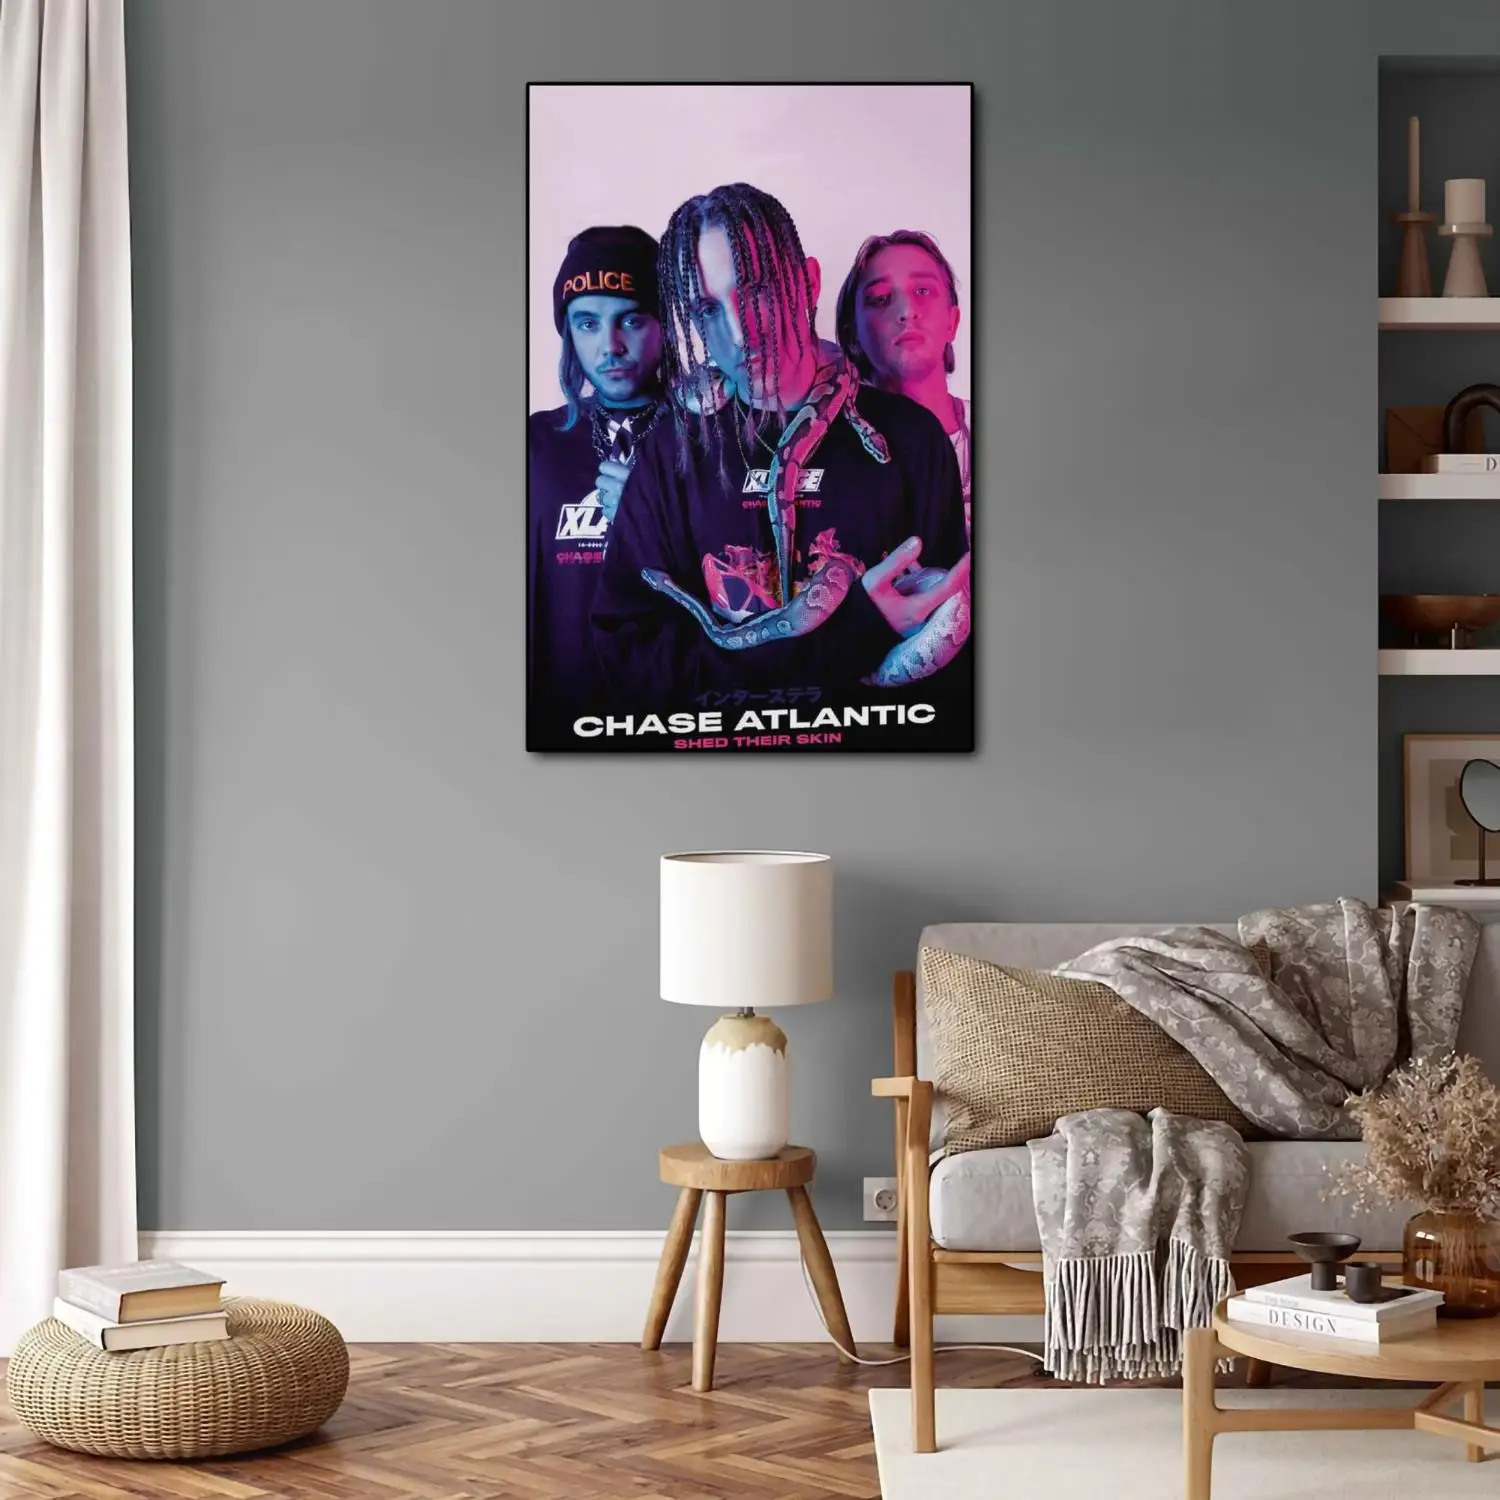 HGTUP Friends by Chase Atlantic (2) Canvas Poster Bedroom Decor